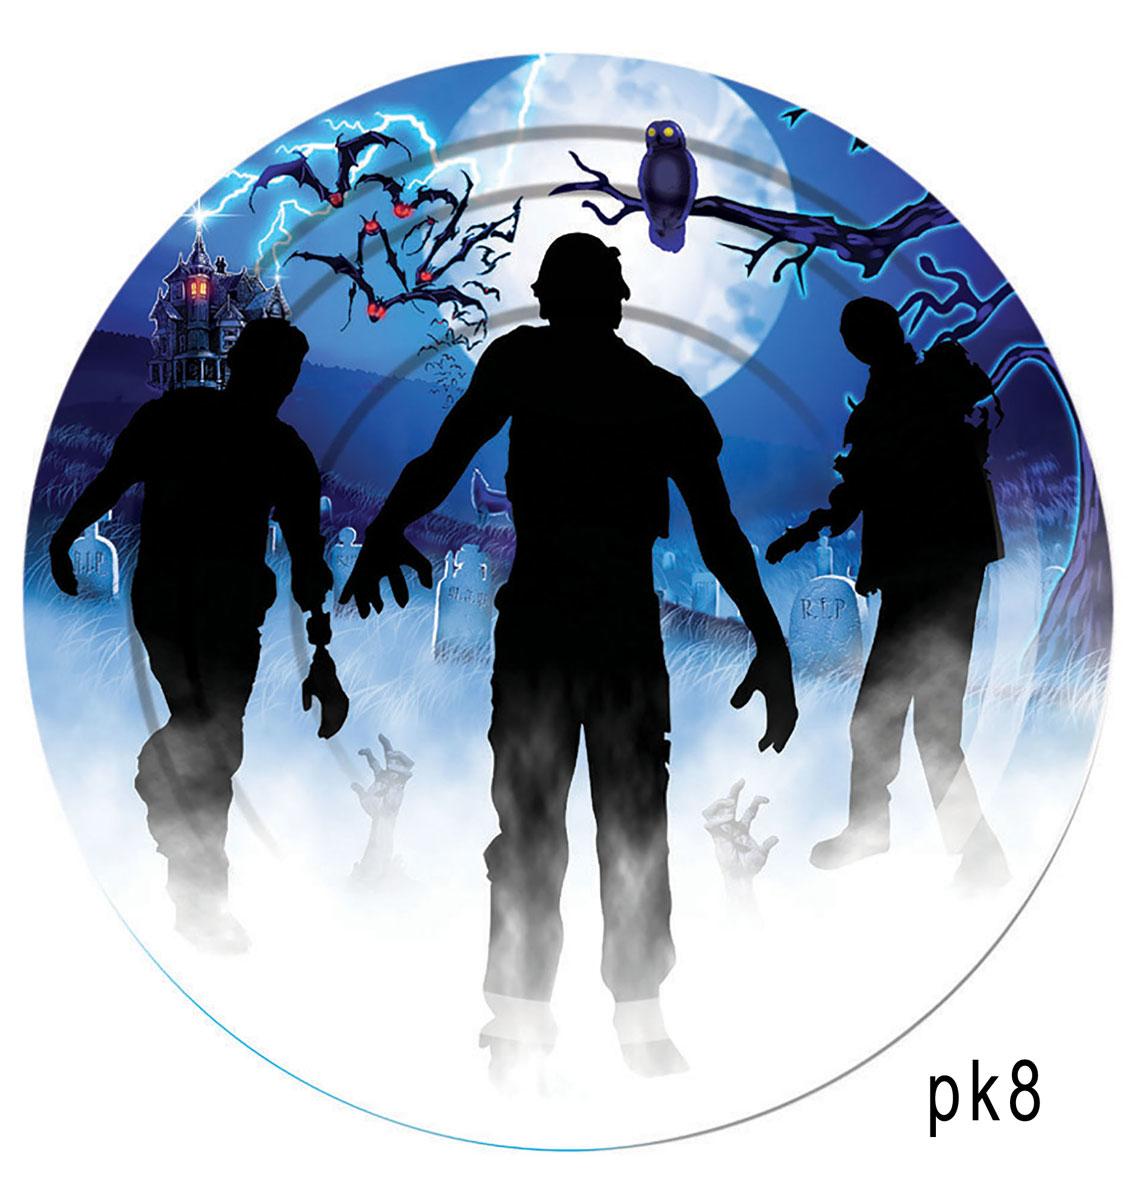 pack of 8 Zombie Rising 7" Dessert Paper Plates by Forum Novelties 79137 available here at Karnival Costumes online Halloween party shop